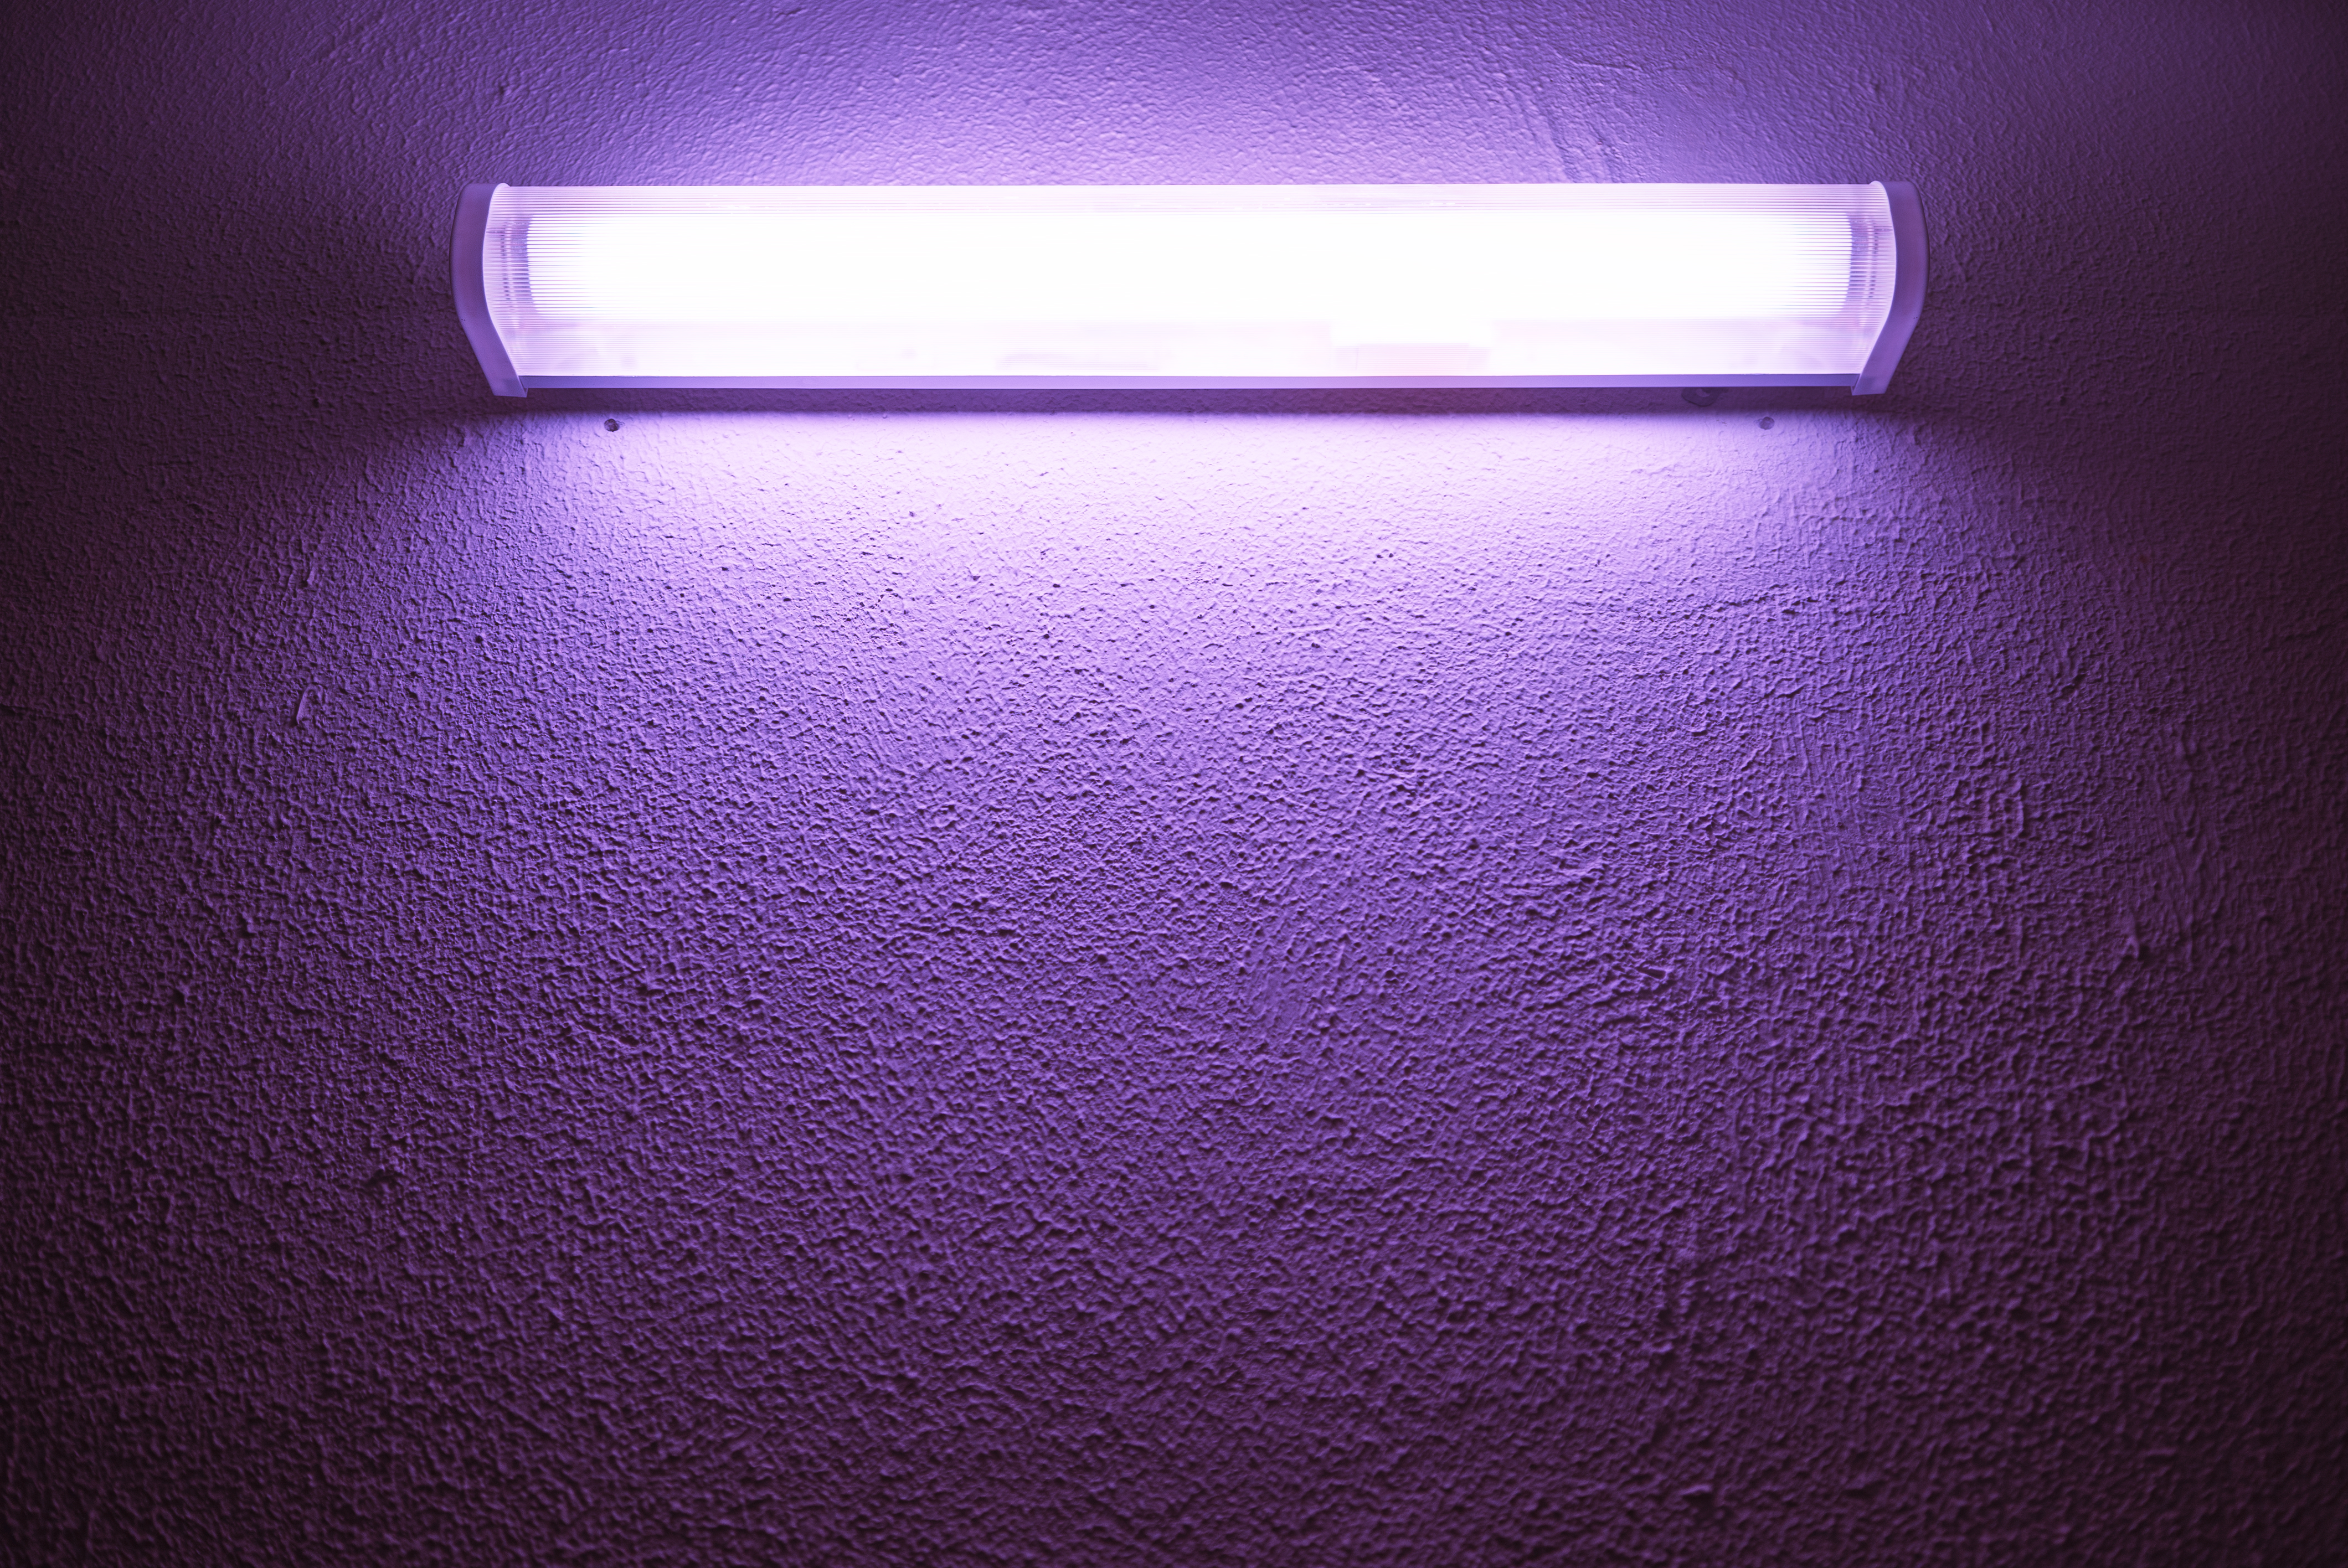 The Difference Between Black Light and UV Light | Hunker